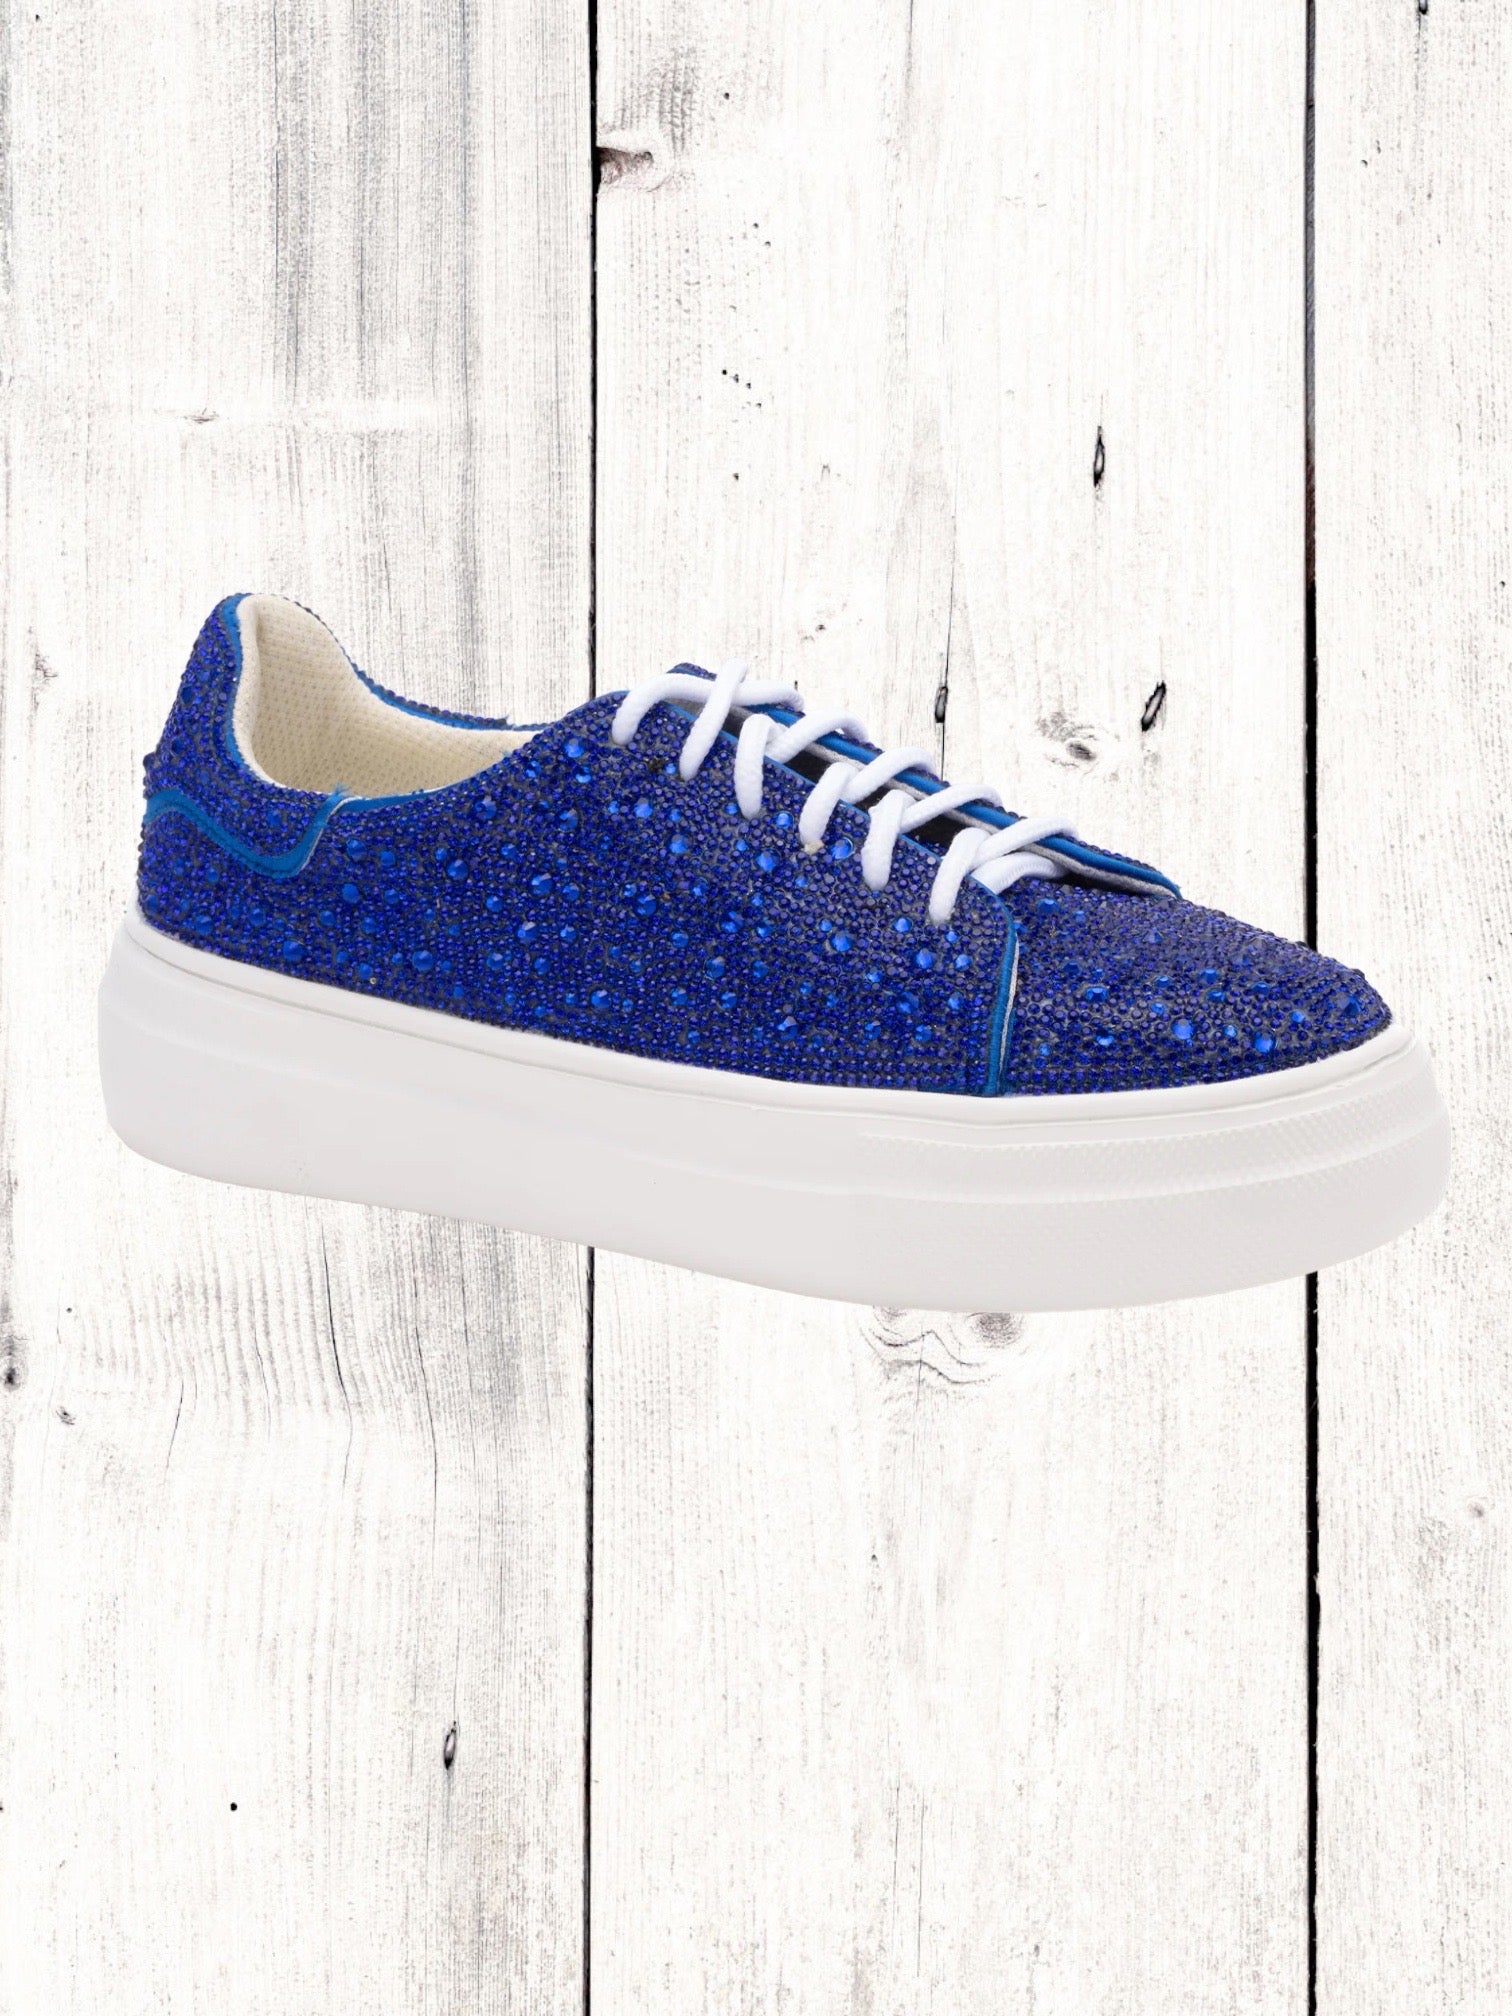 Update more than 73 blue sneakers for ladies best